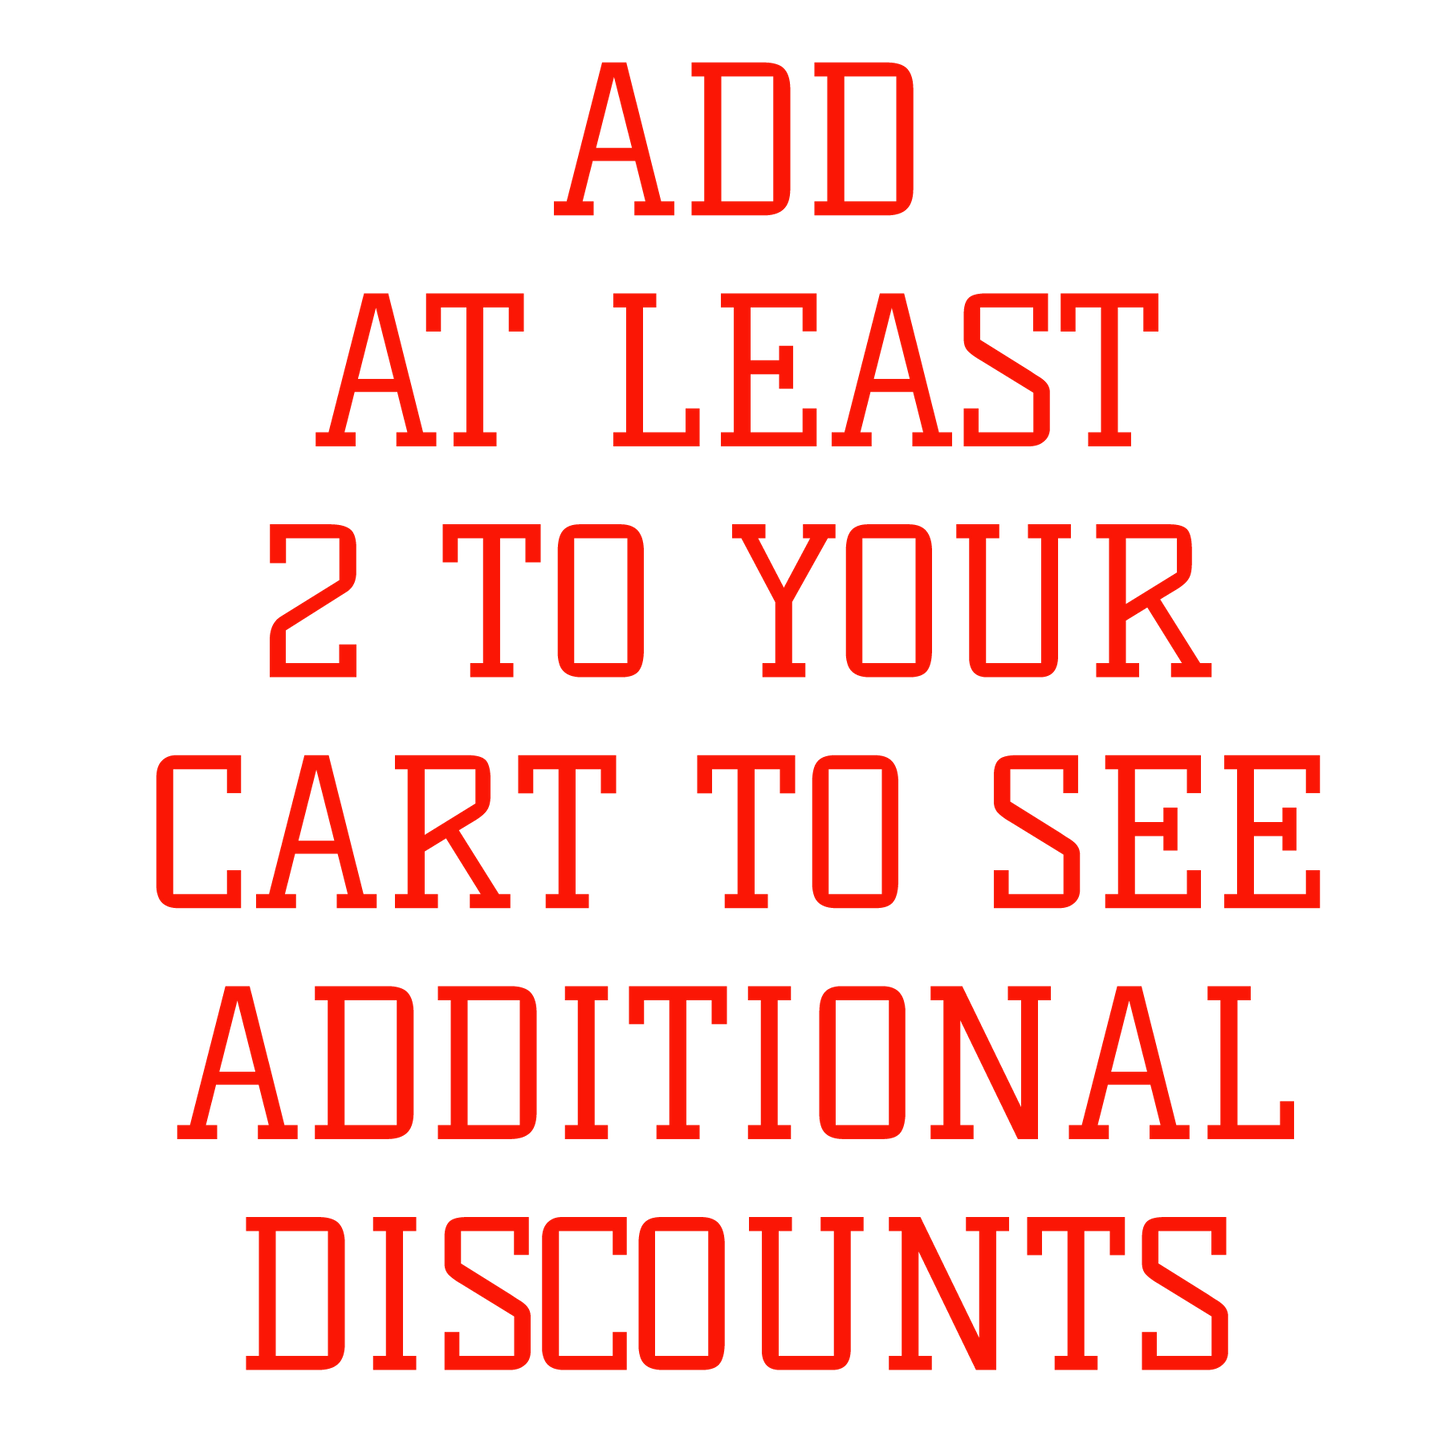 Add 2 or more to your cart to see discounts